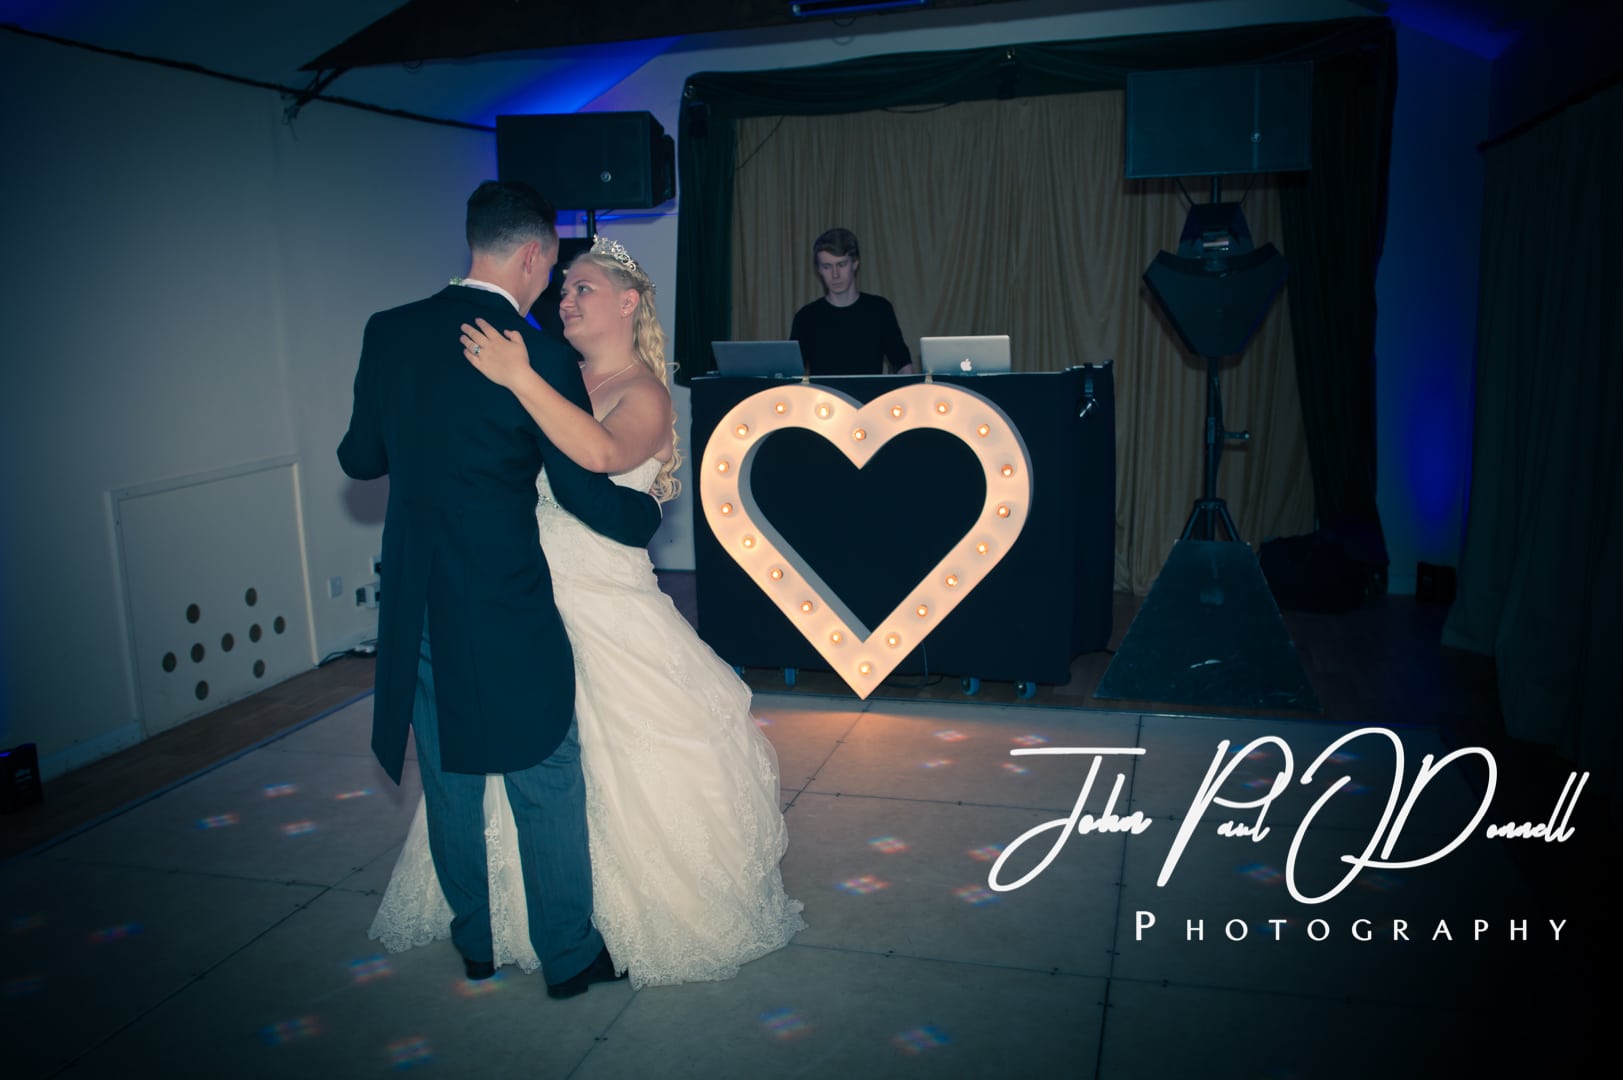 Abbie and Will's summer wedding at Minstrel Court in Royston